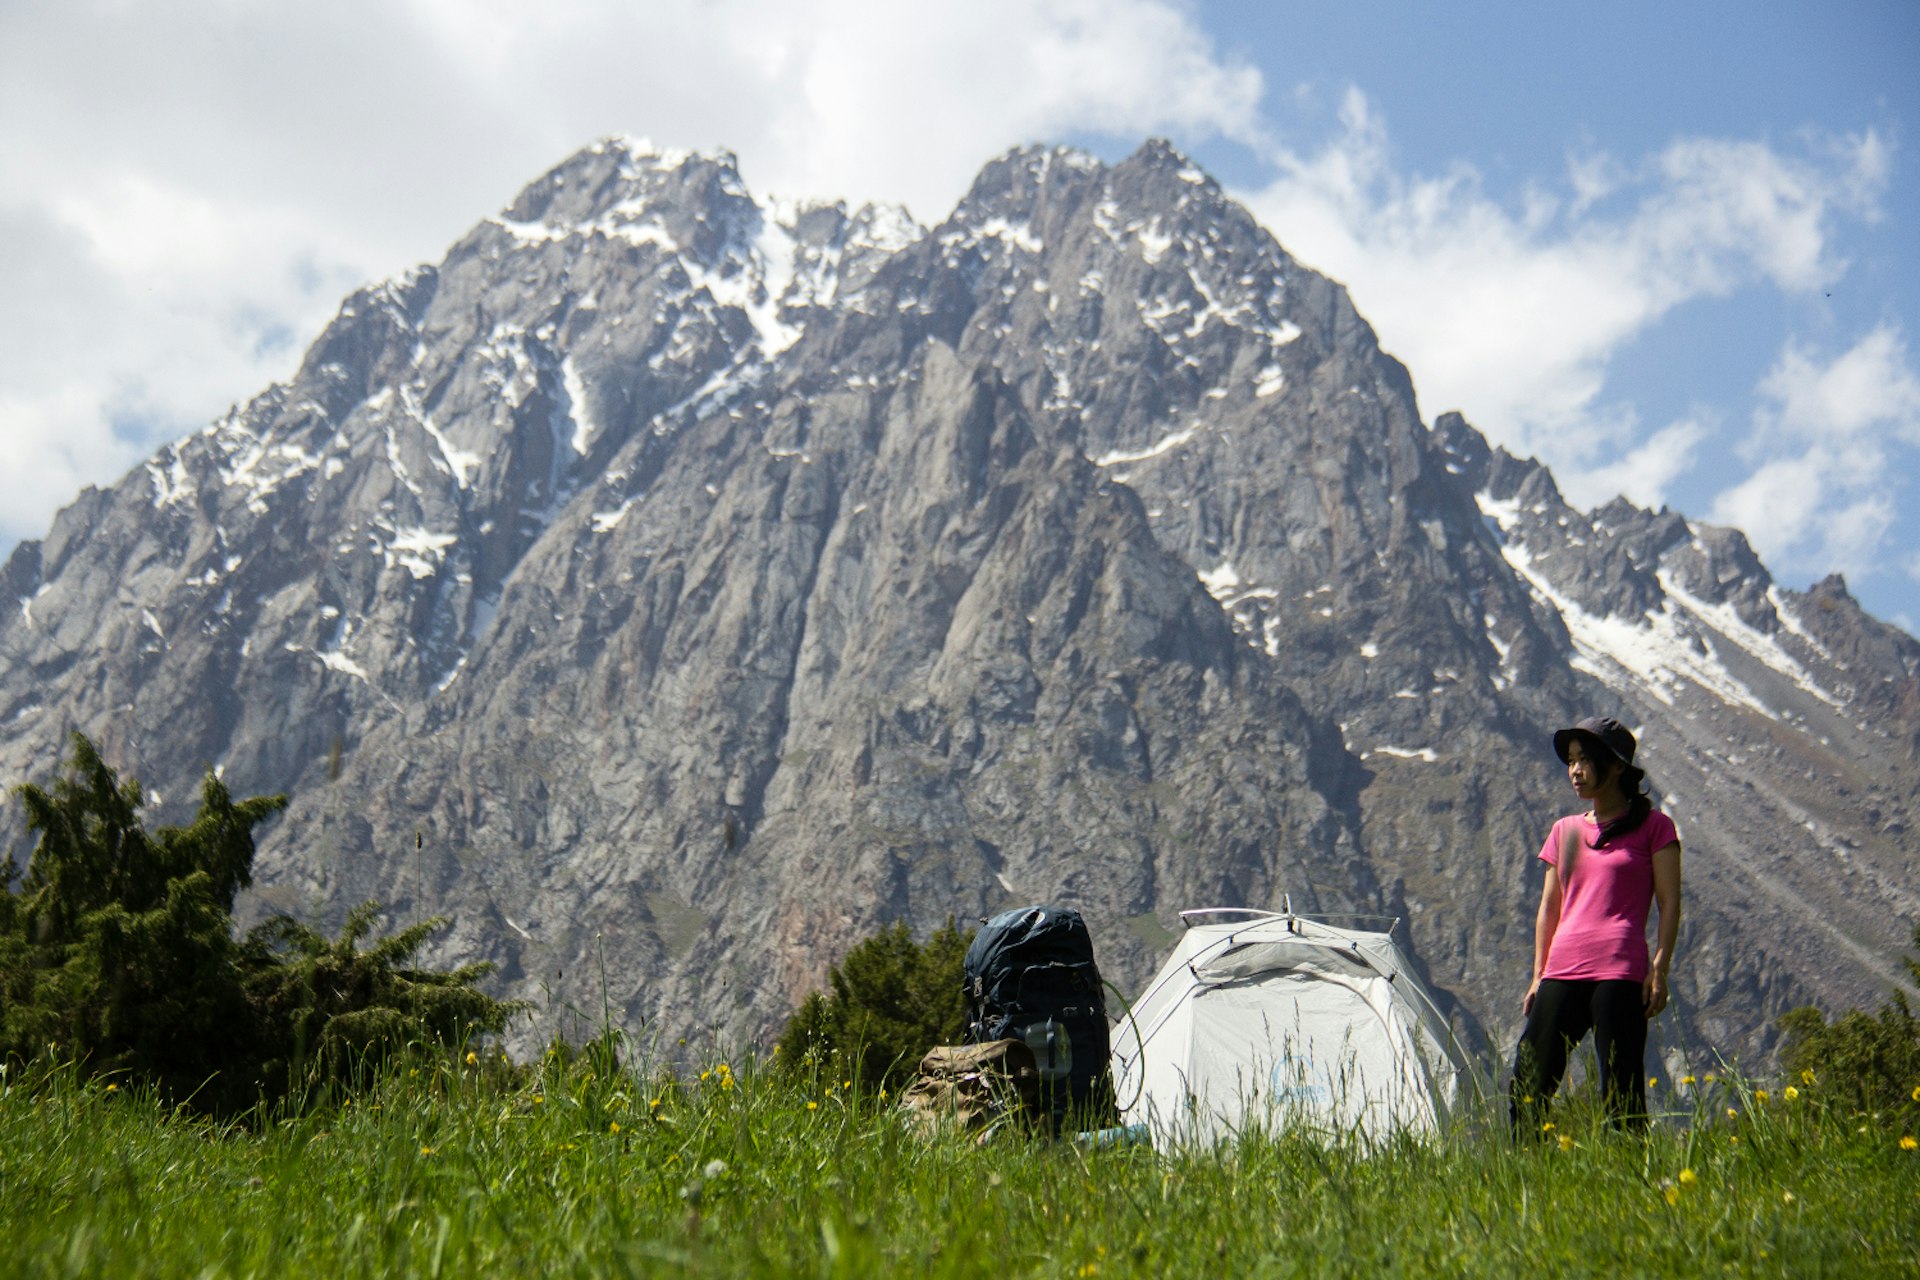 Camping below the stunning peaks of the Issyk-Ata Valley. Image by Stephen Lioy / Lonely Planet